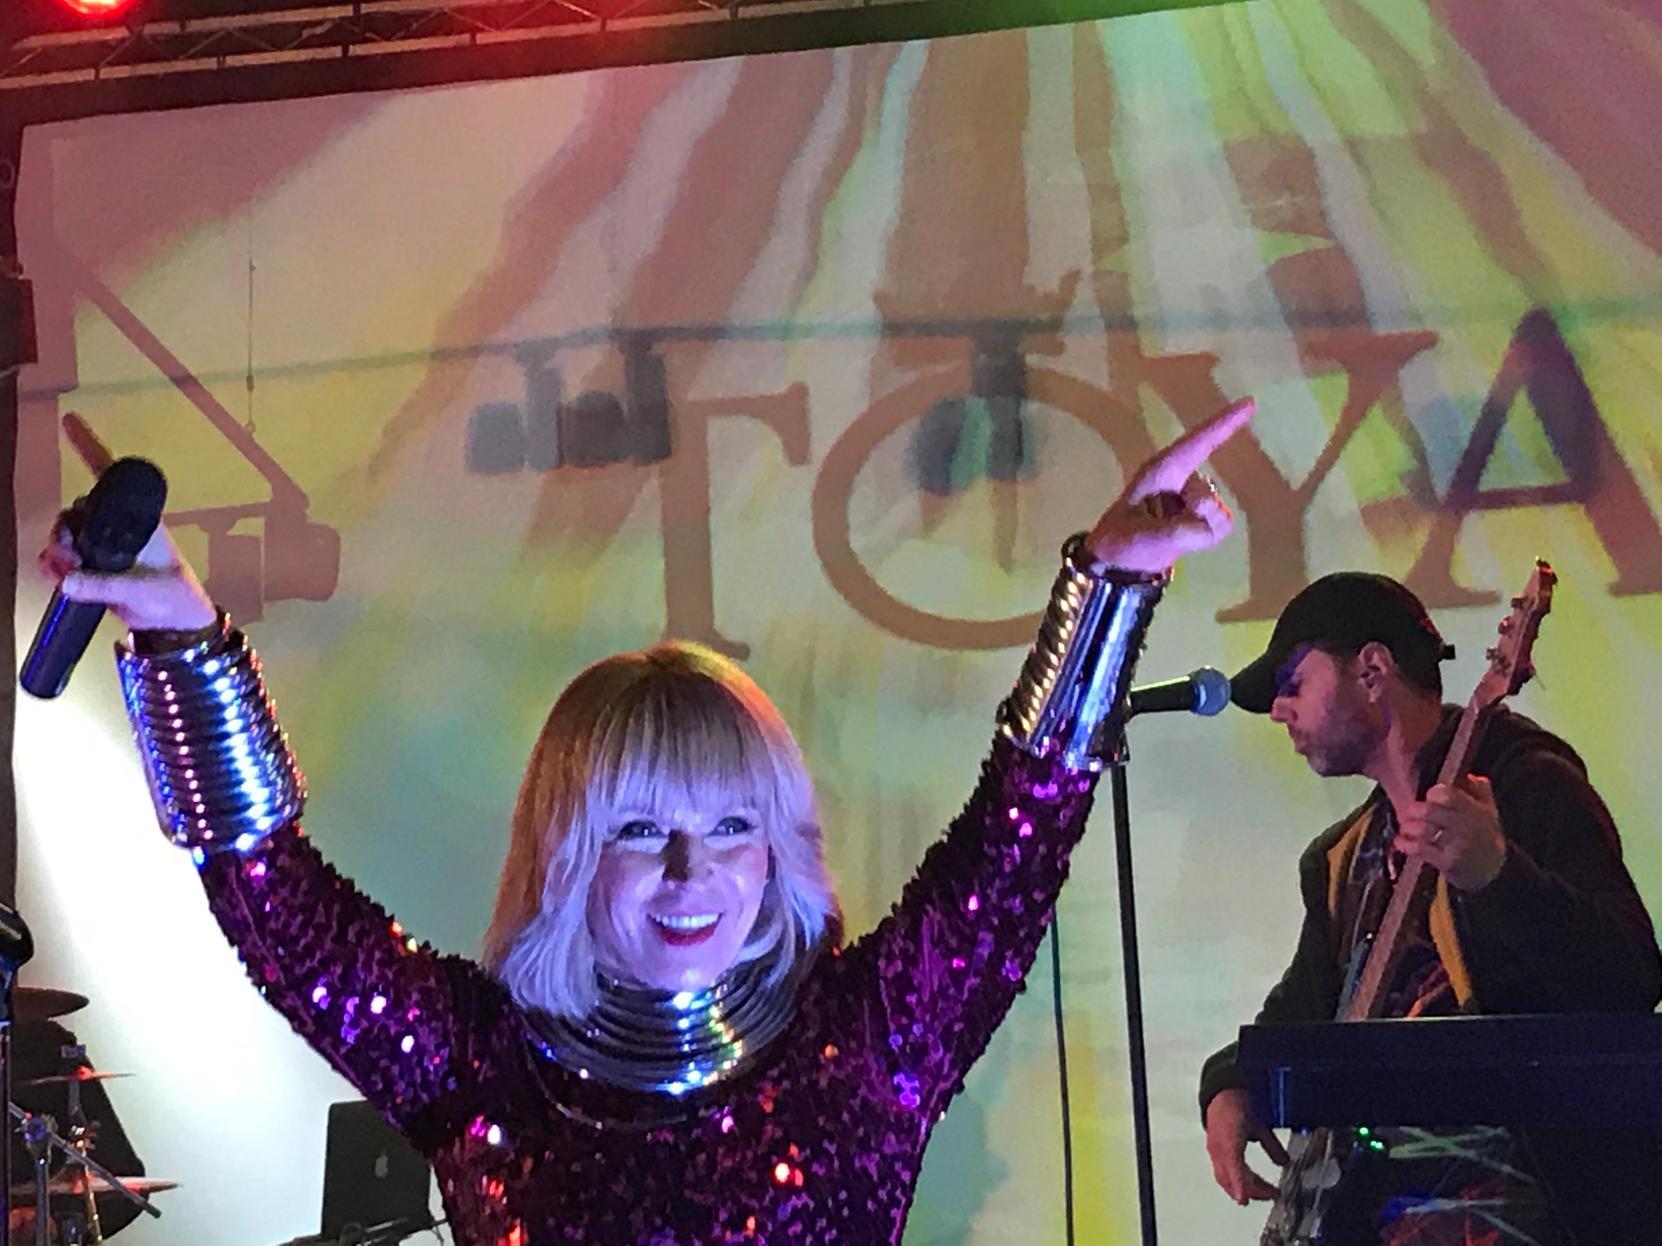 The coat-clad audience were quickly warmed by Toyah's aura